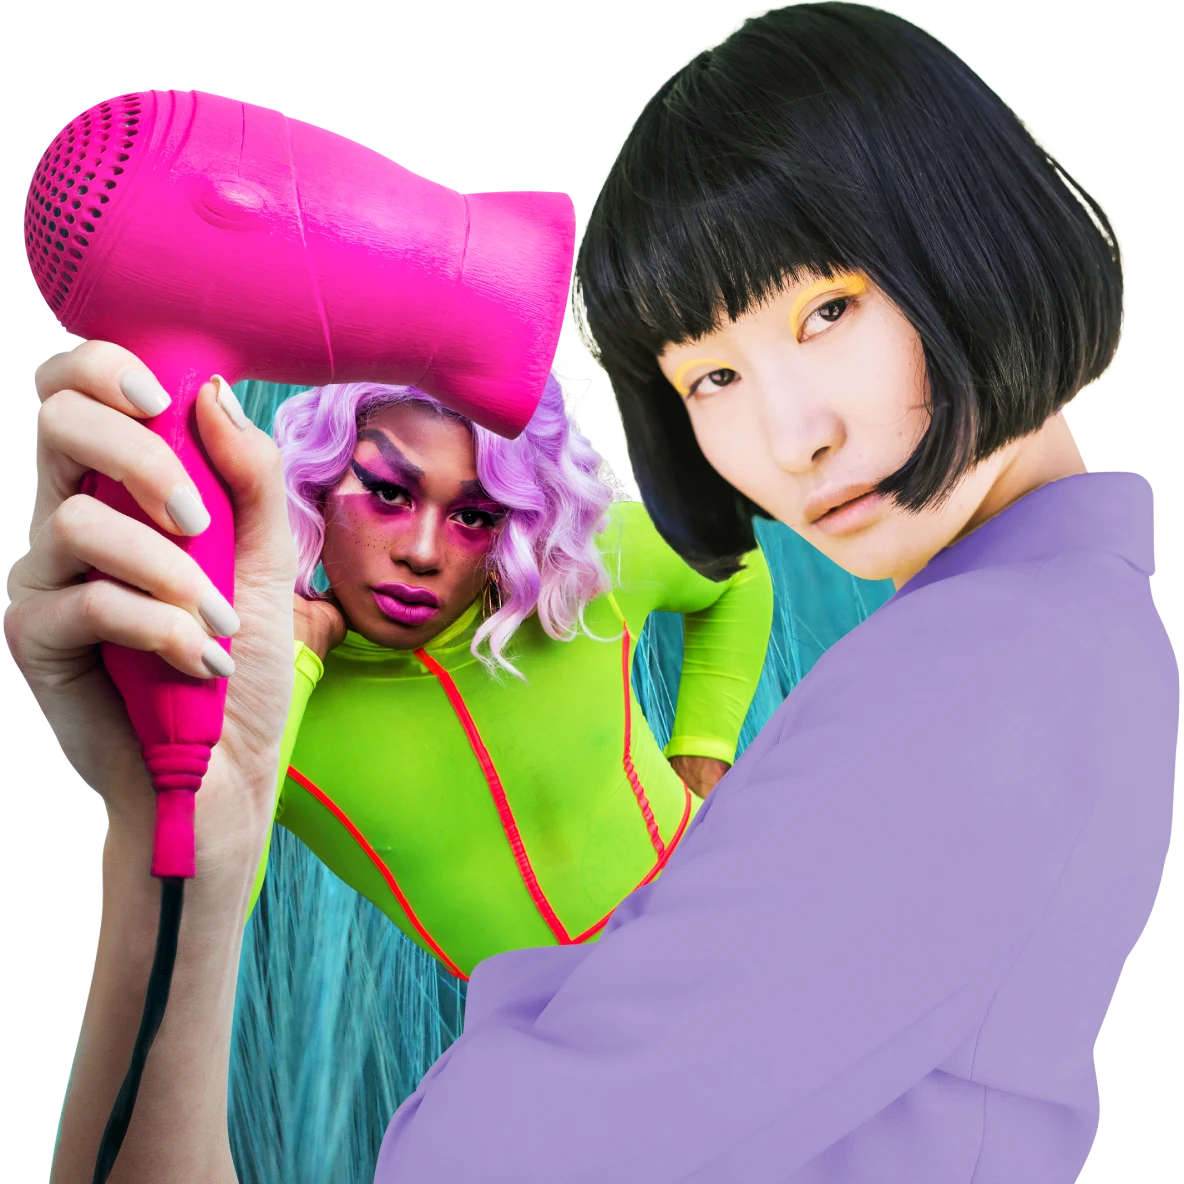 An East Asian woman is holding a large, dark pink hairdryer. A Black woman is in the background, wearing a purple wig and a neon green long-sleeved top.